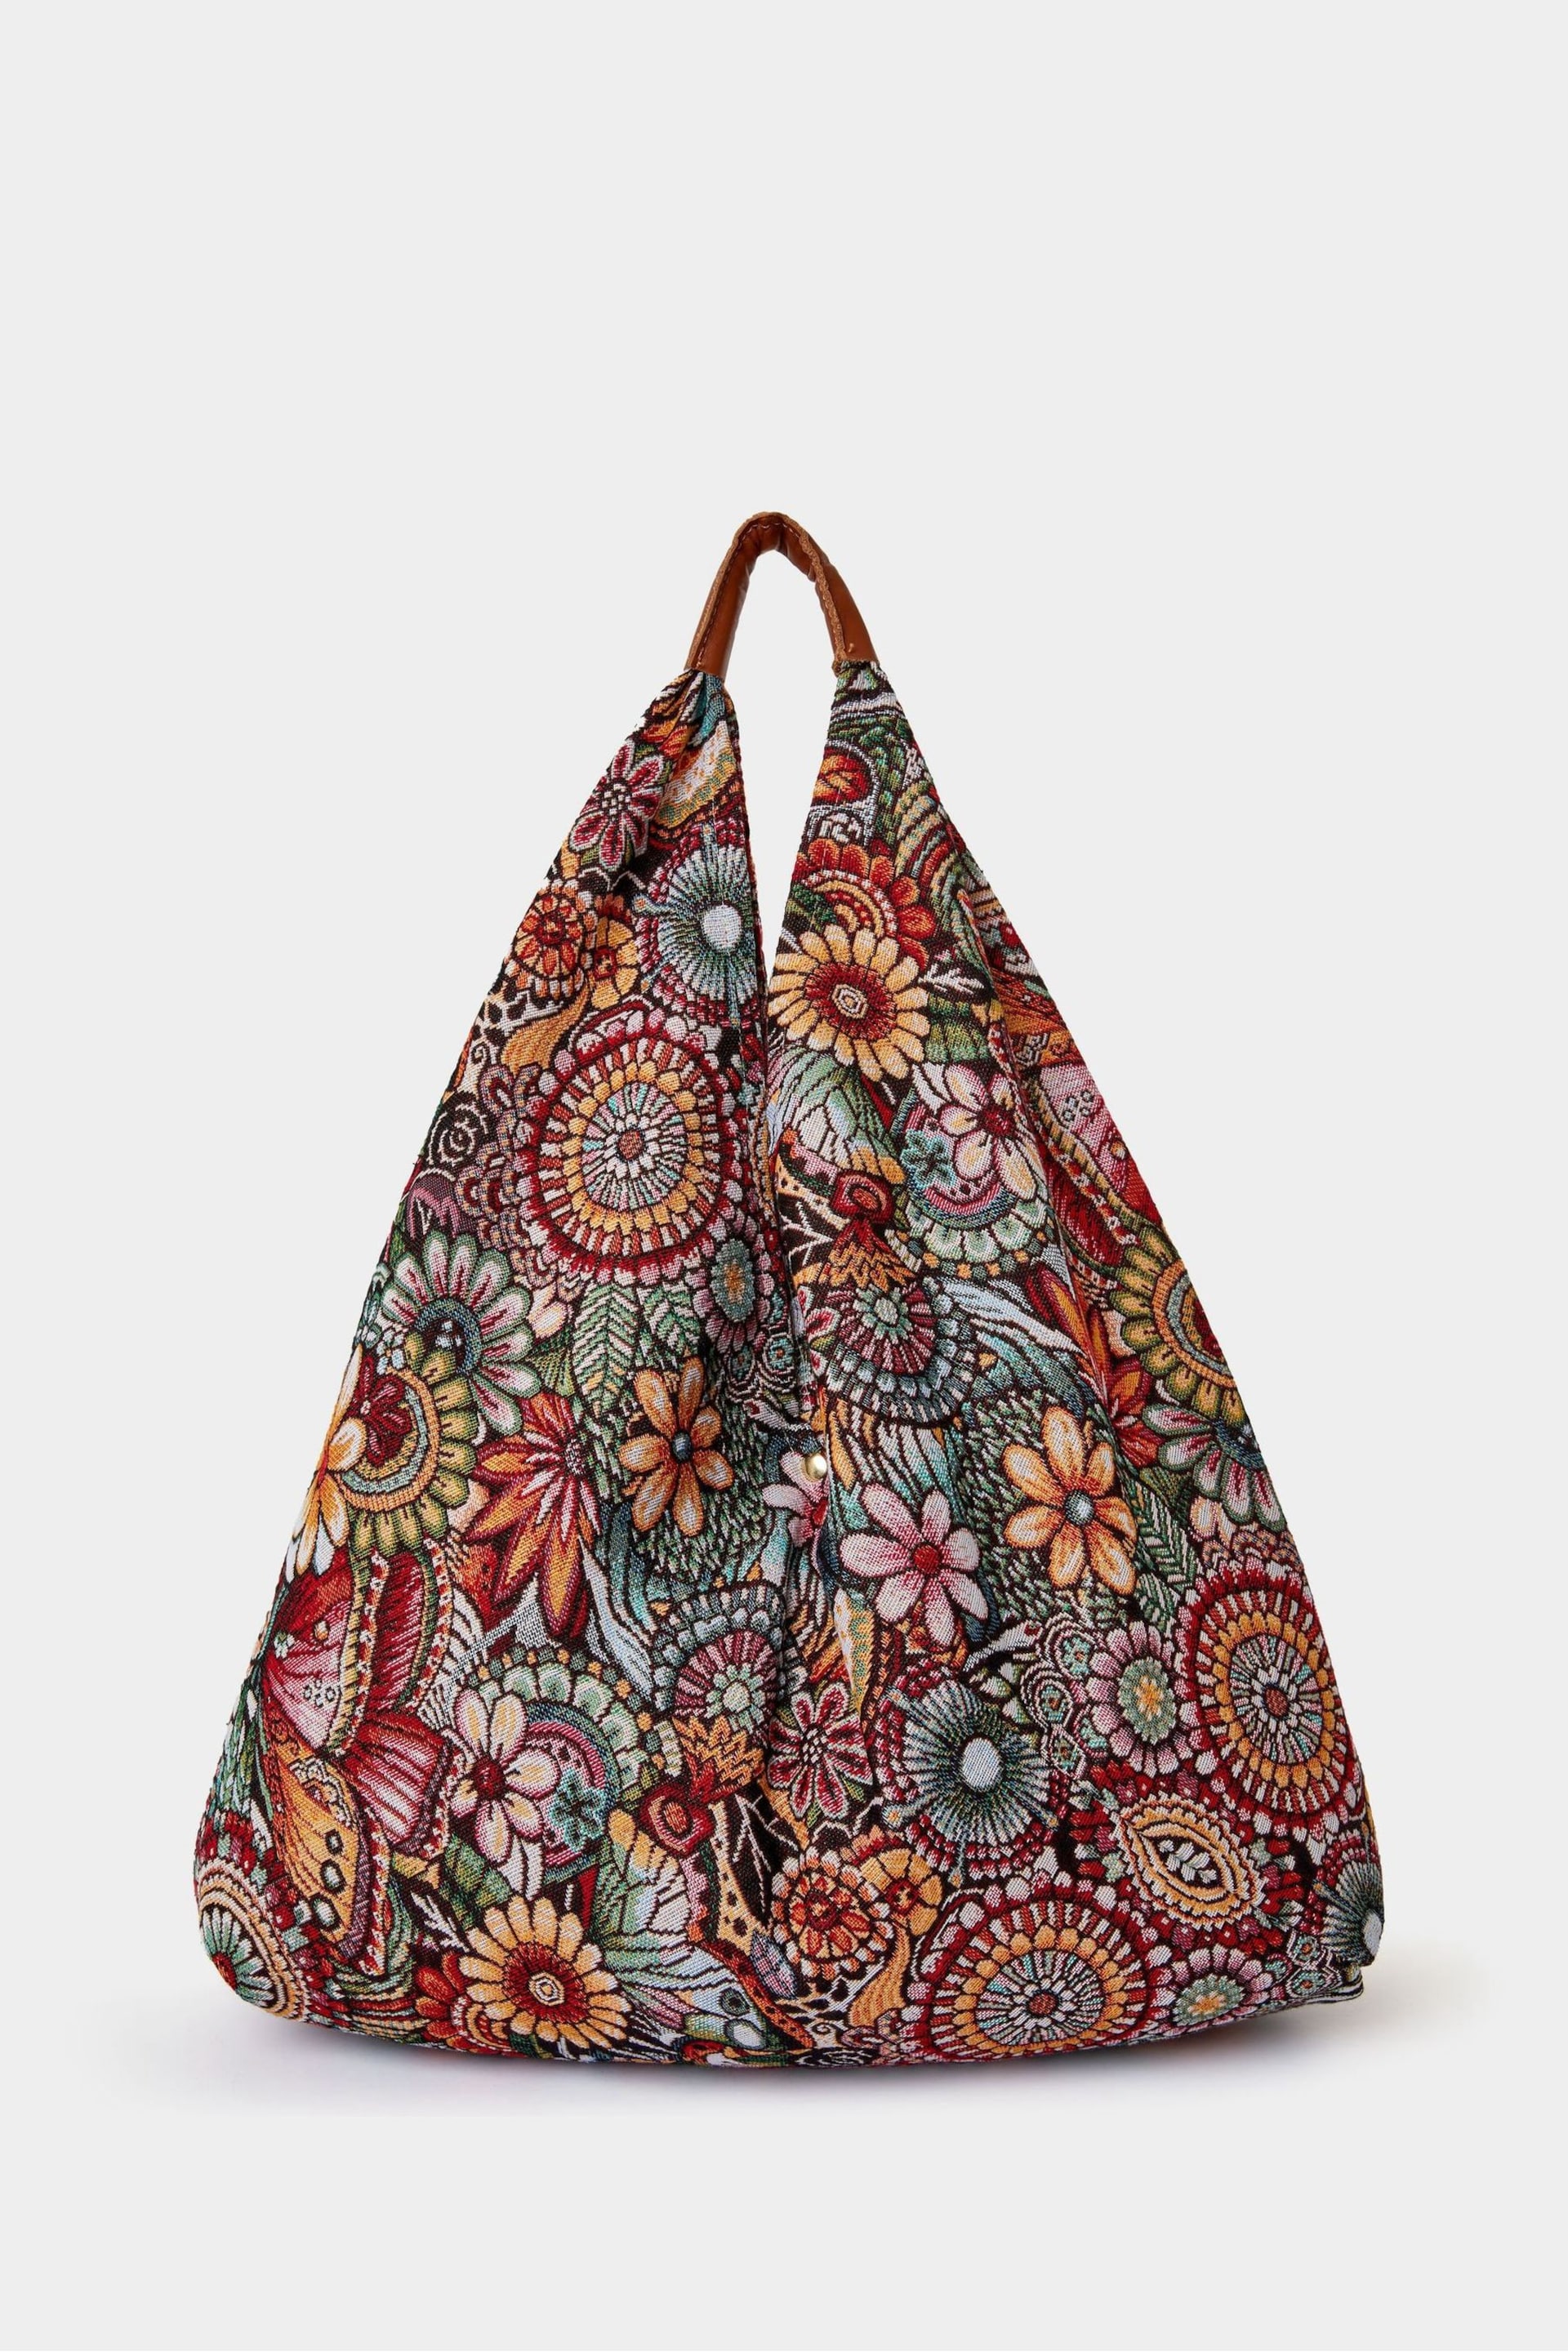 Joe Browns Grey Tapestry Carpet Bag with Leather Handles - Image 1 of 3